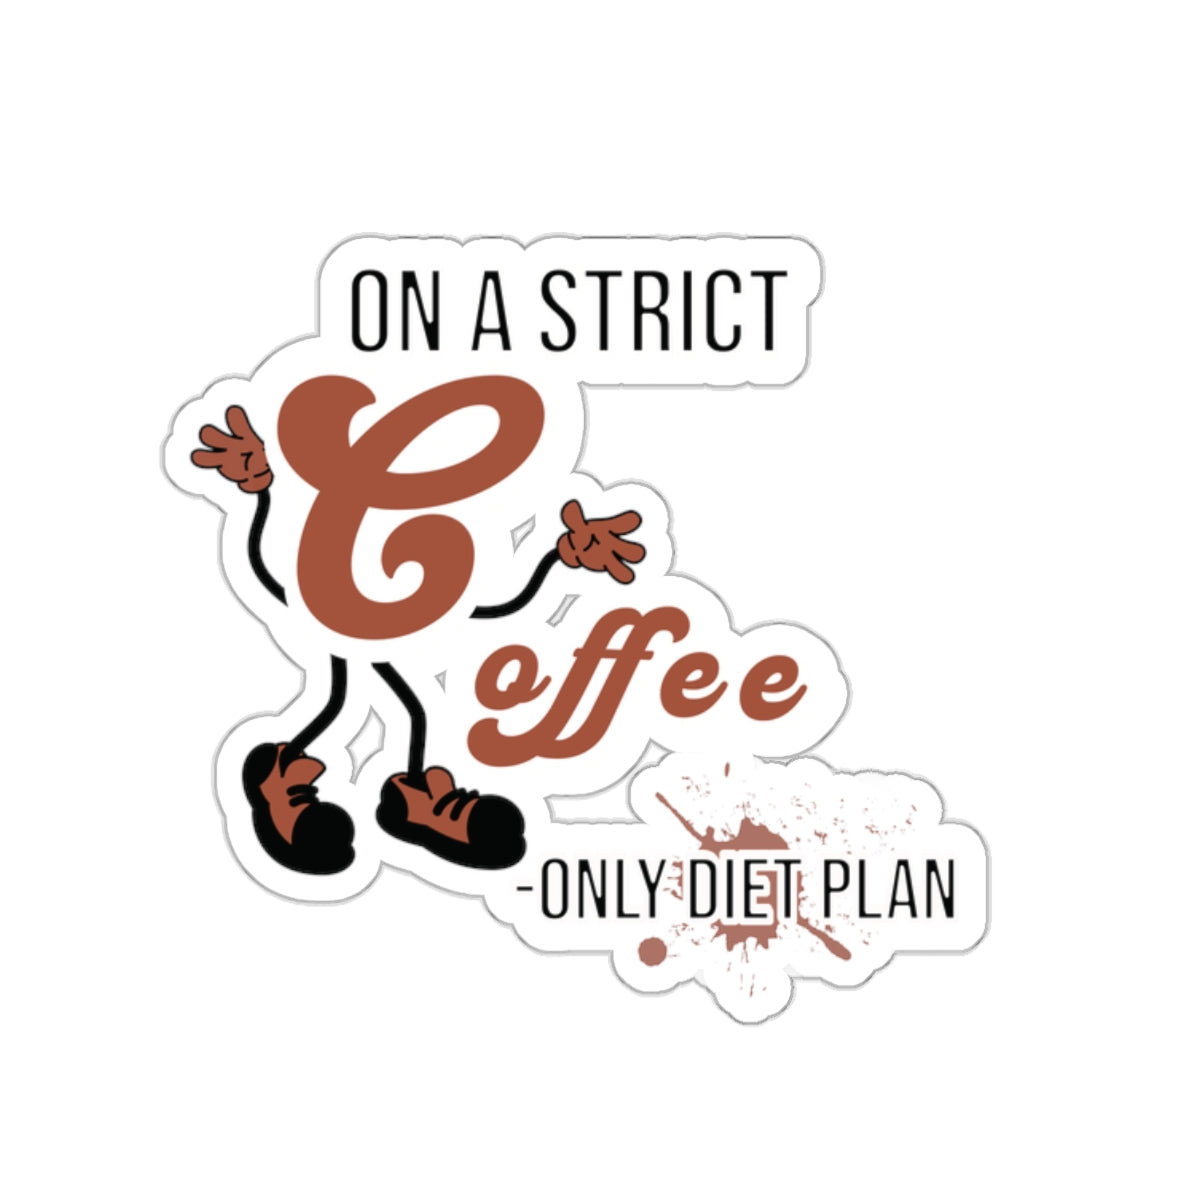 On A Strict Coffee Only Diet Plan Funny Quote Kiss-Cut Stickers-Paper products-2" × 2"-White-mysticalcherry